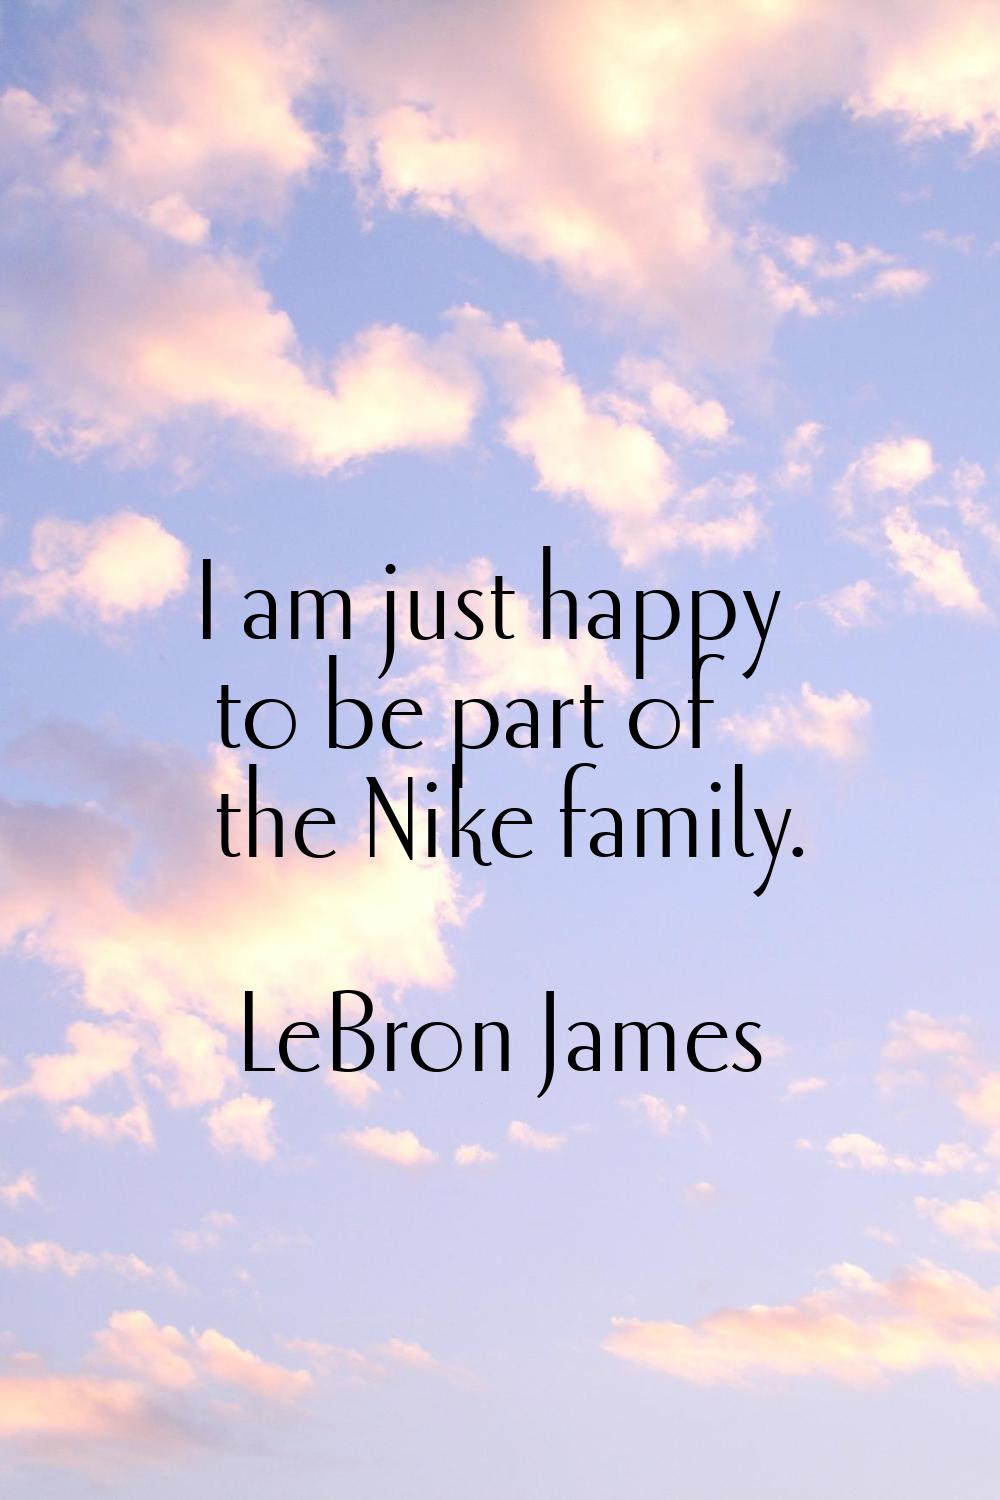 I am just happy to be part of the Nike family.